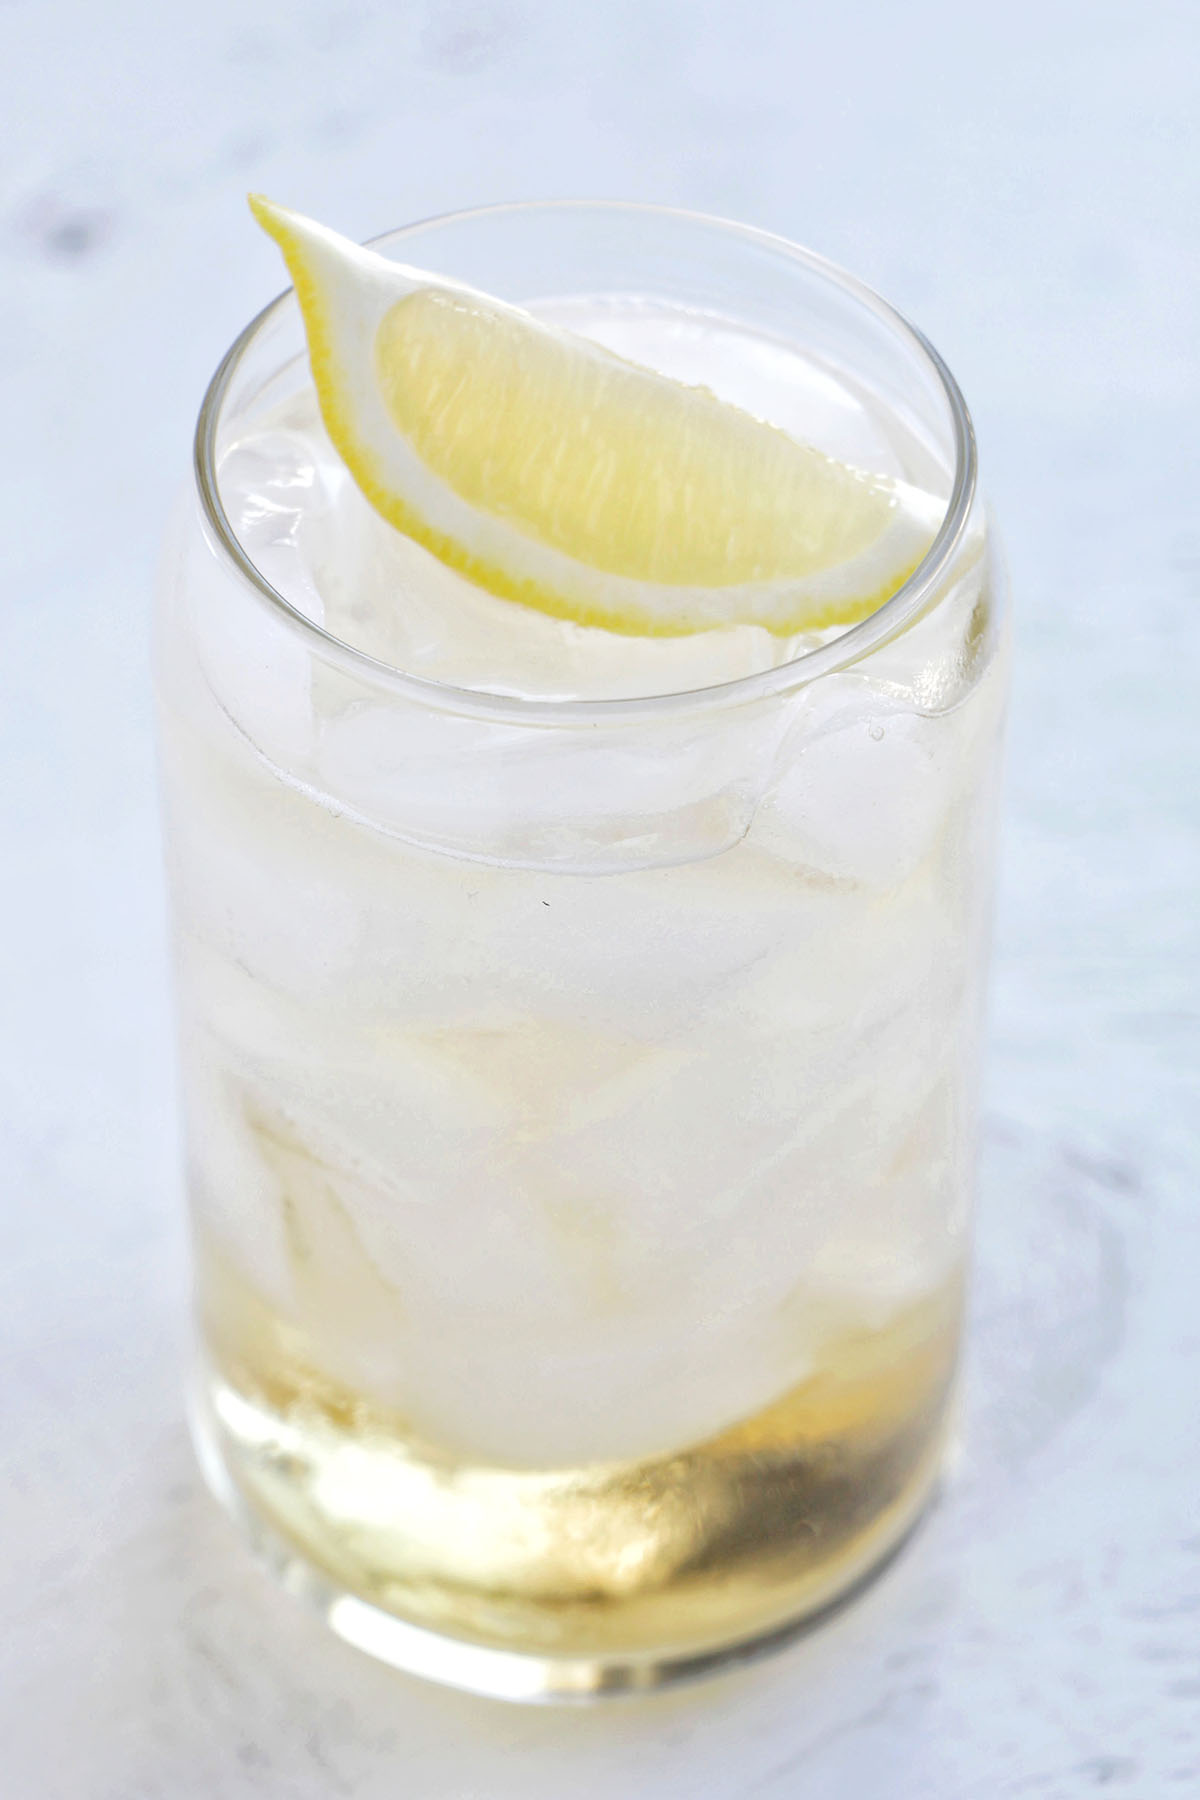 bourbon and ginger ale drink.